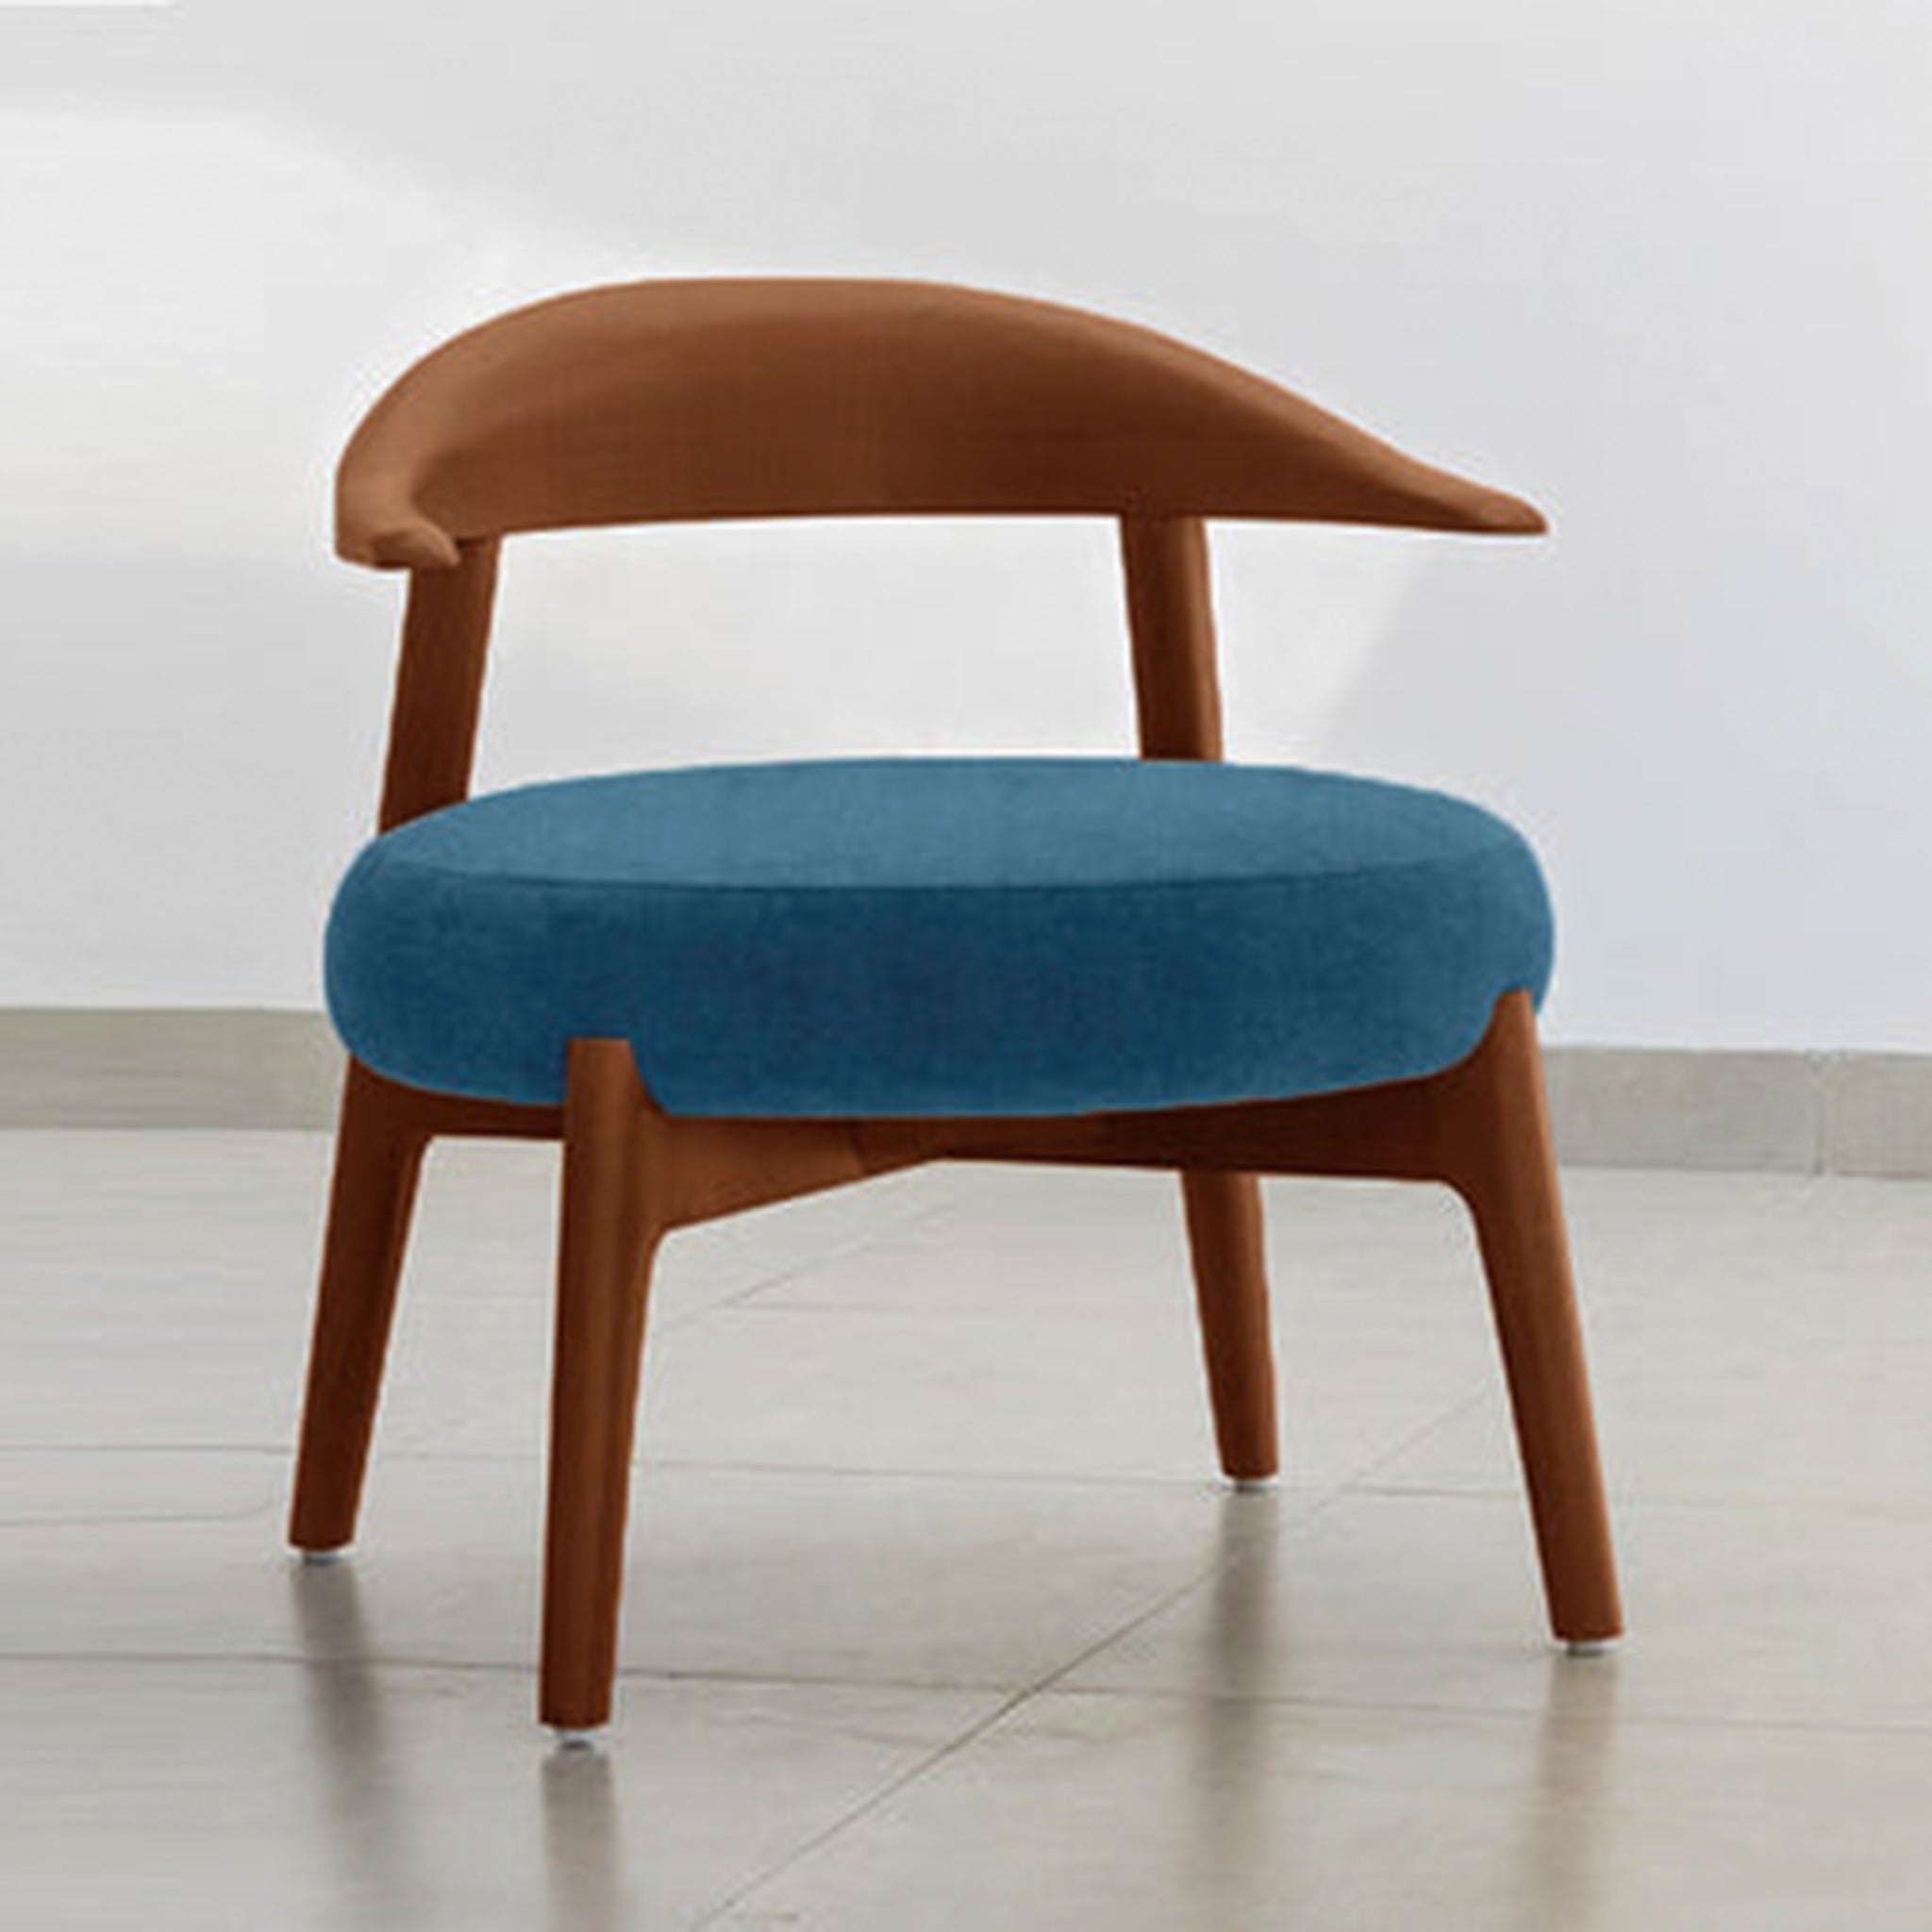 "Modern and sophisticated Hyde Accent Chair with blue upholstery"